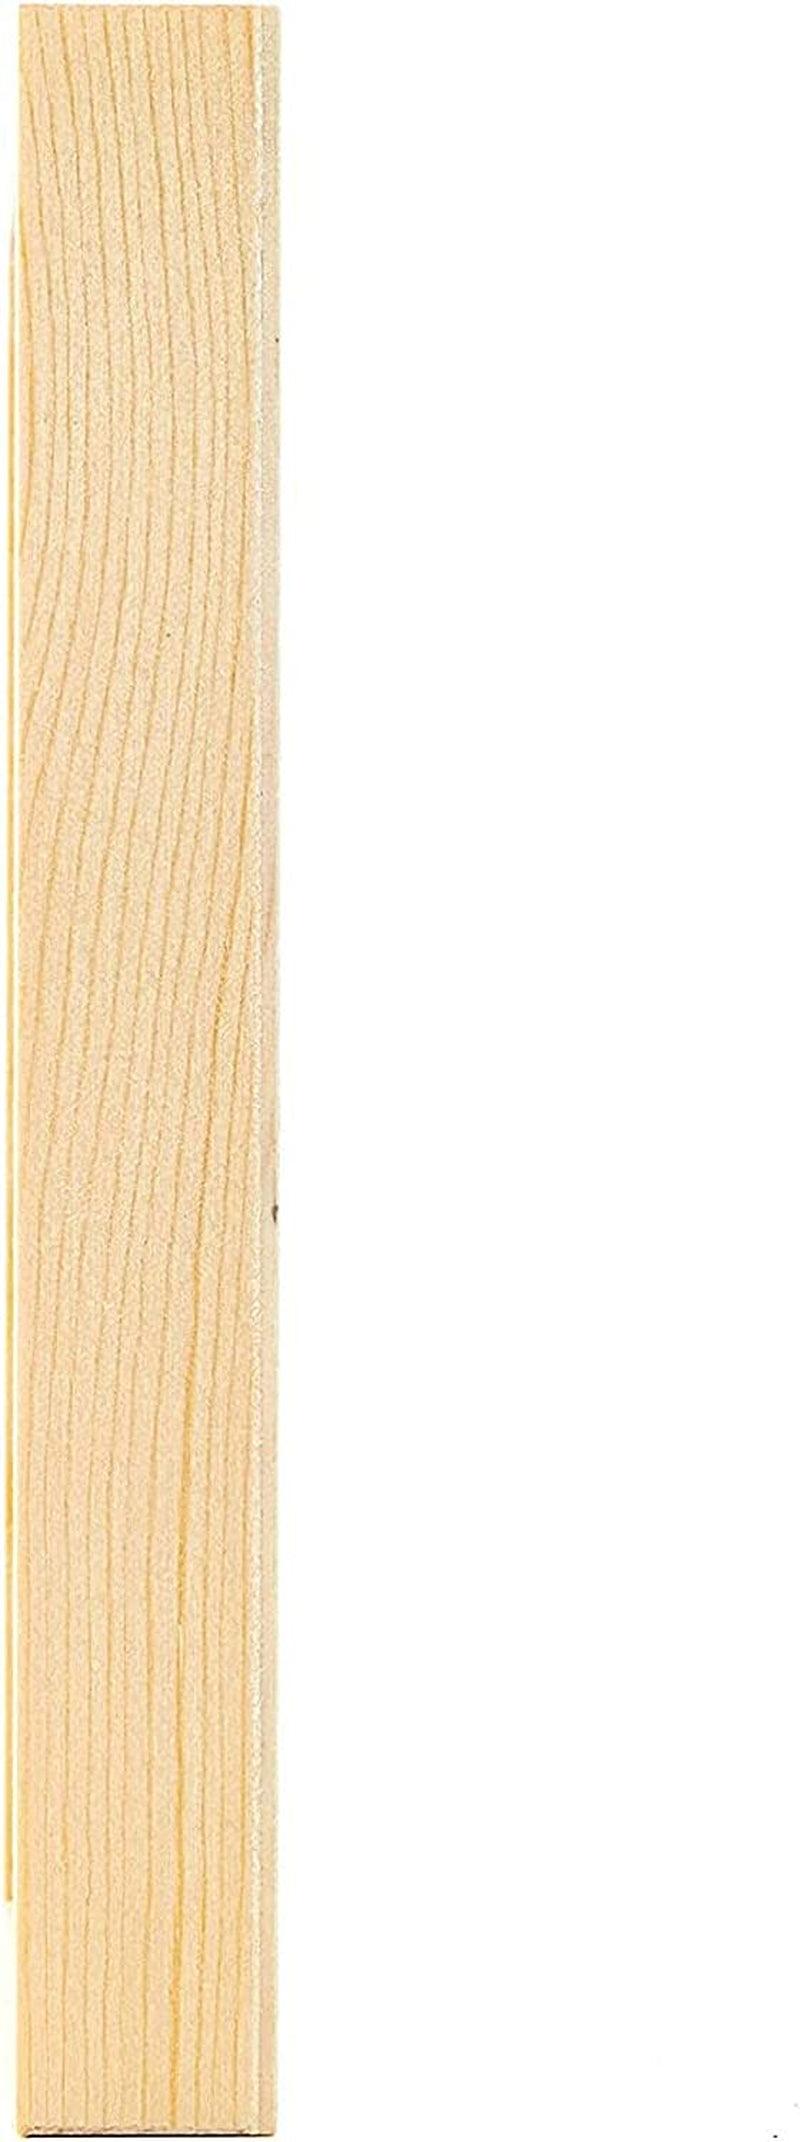 Unfinished Wood Panels for Painting Arts and Crafts (5X7 Inches, 6 Pack) - WoodArtSupply